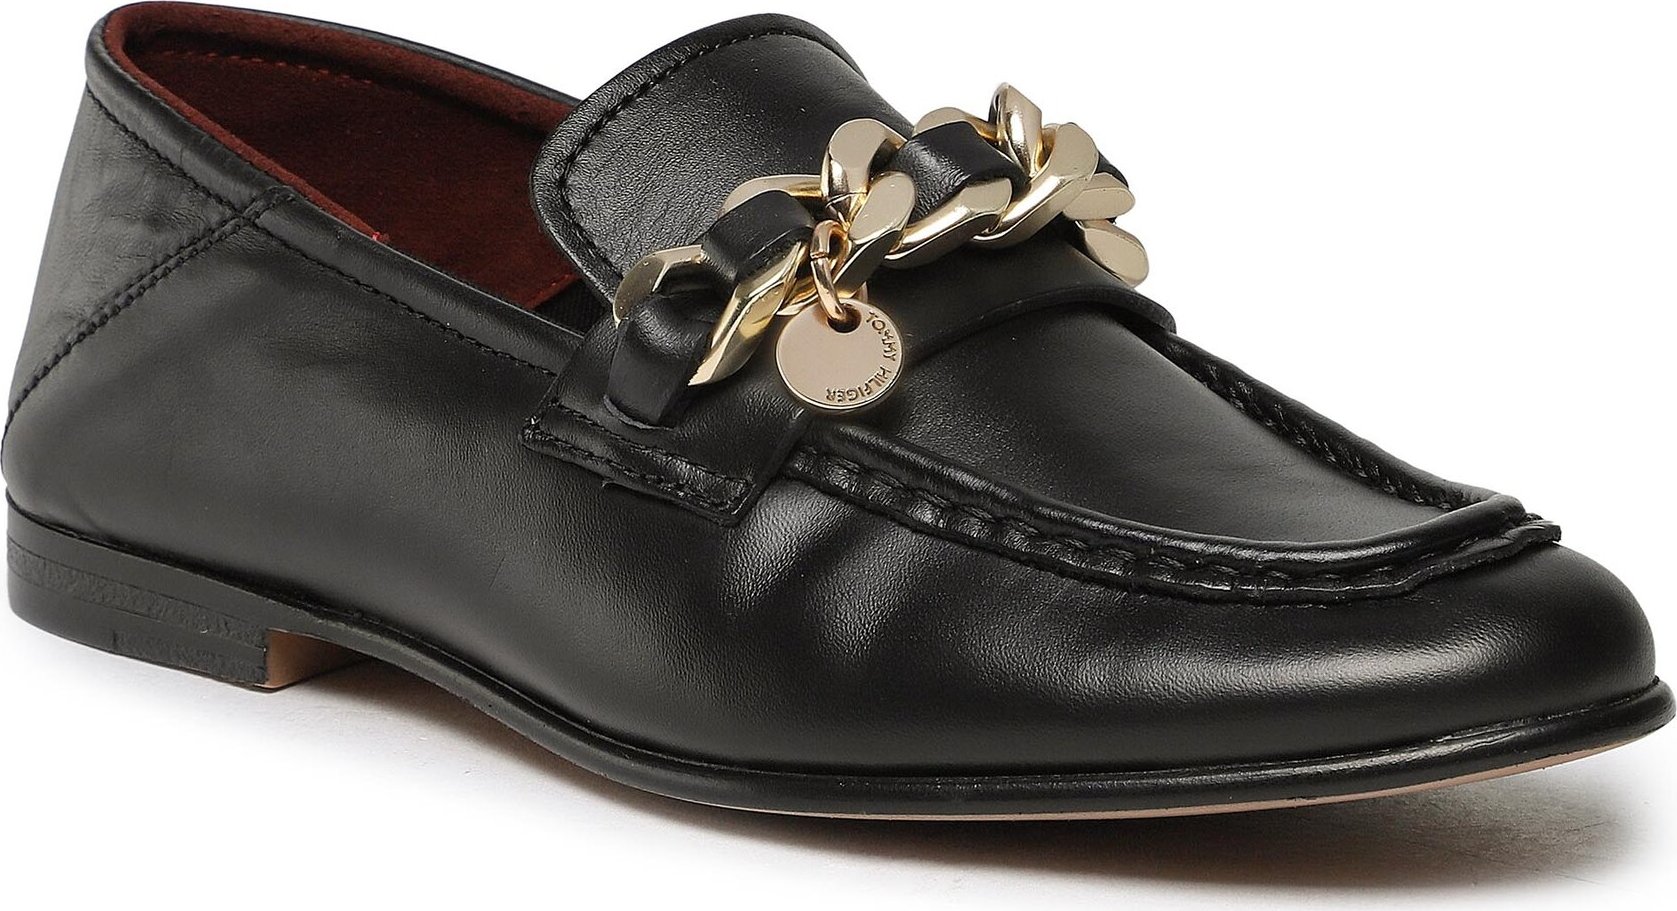 Lordsy Tommy Hilfiger Chain Loafer FW0FW06843 Black BDS